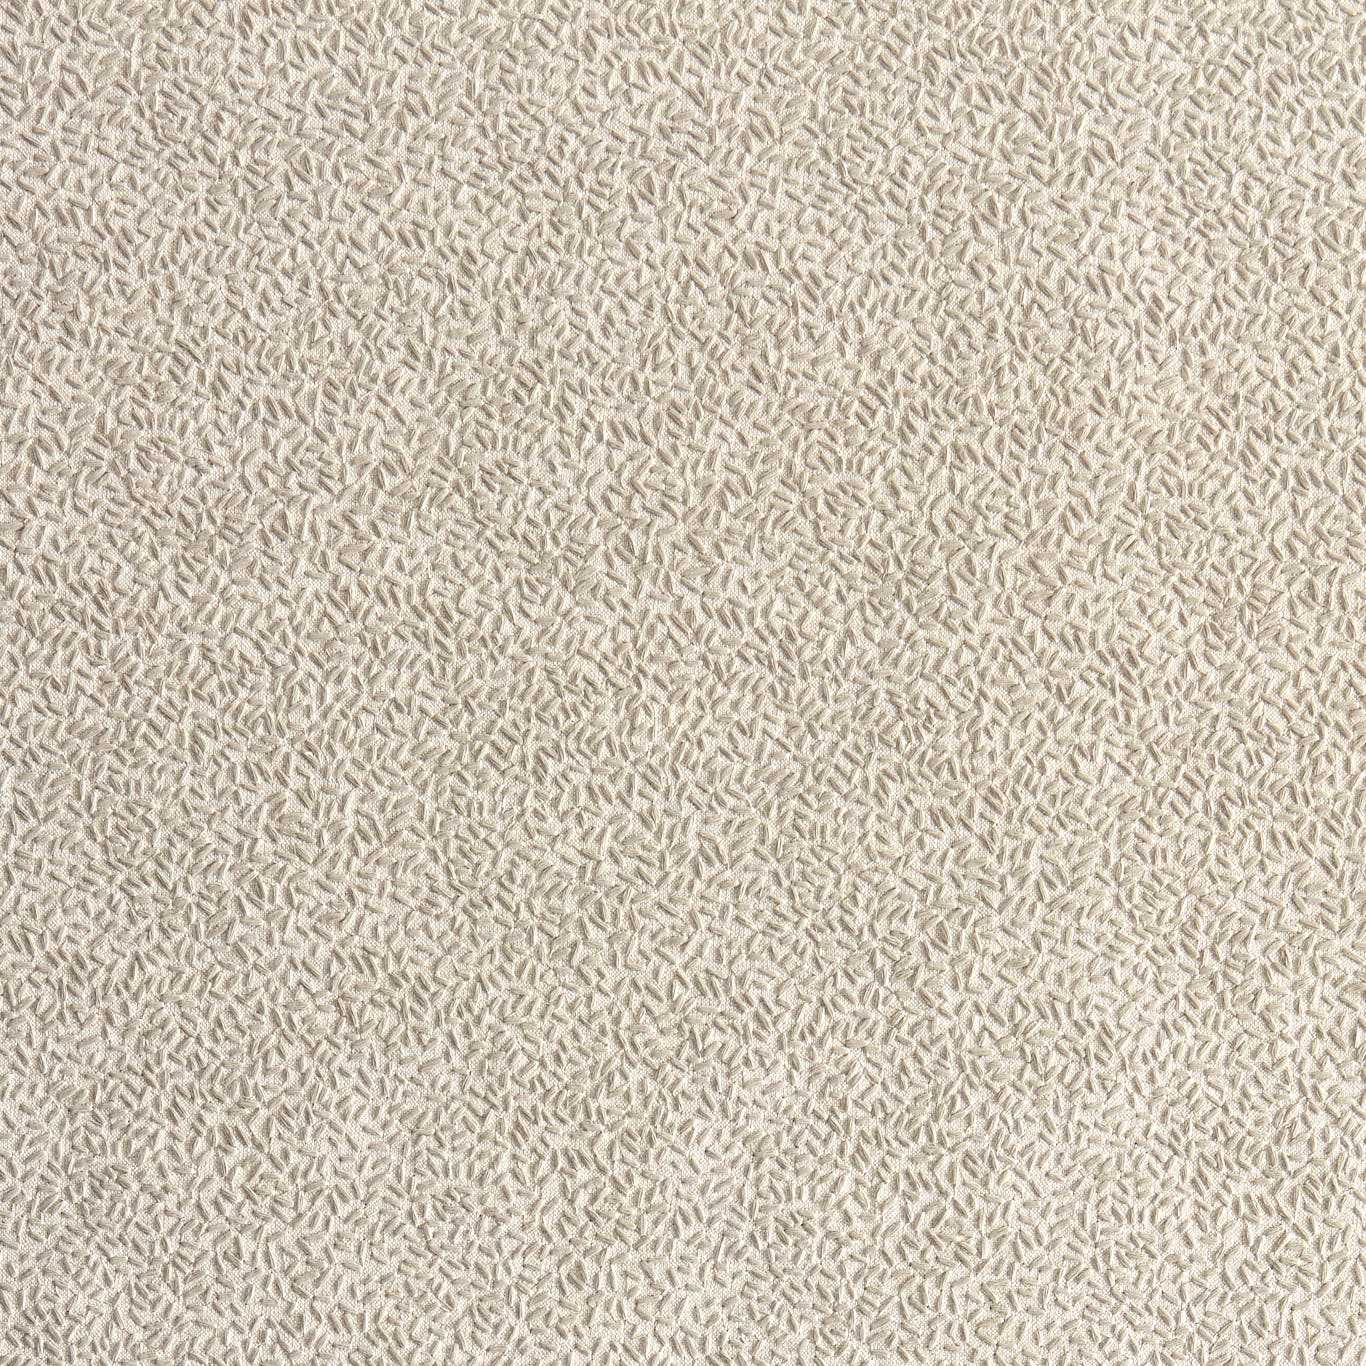 Sow Fabric - Pumice/Mineral